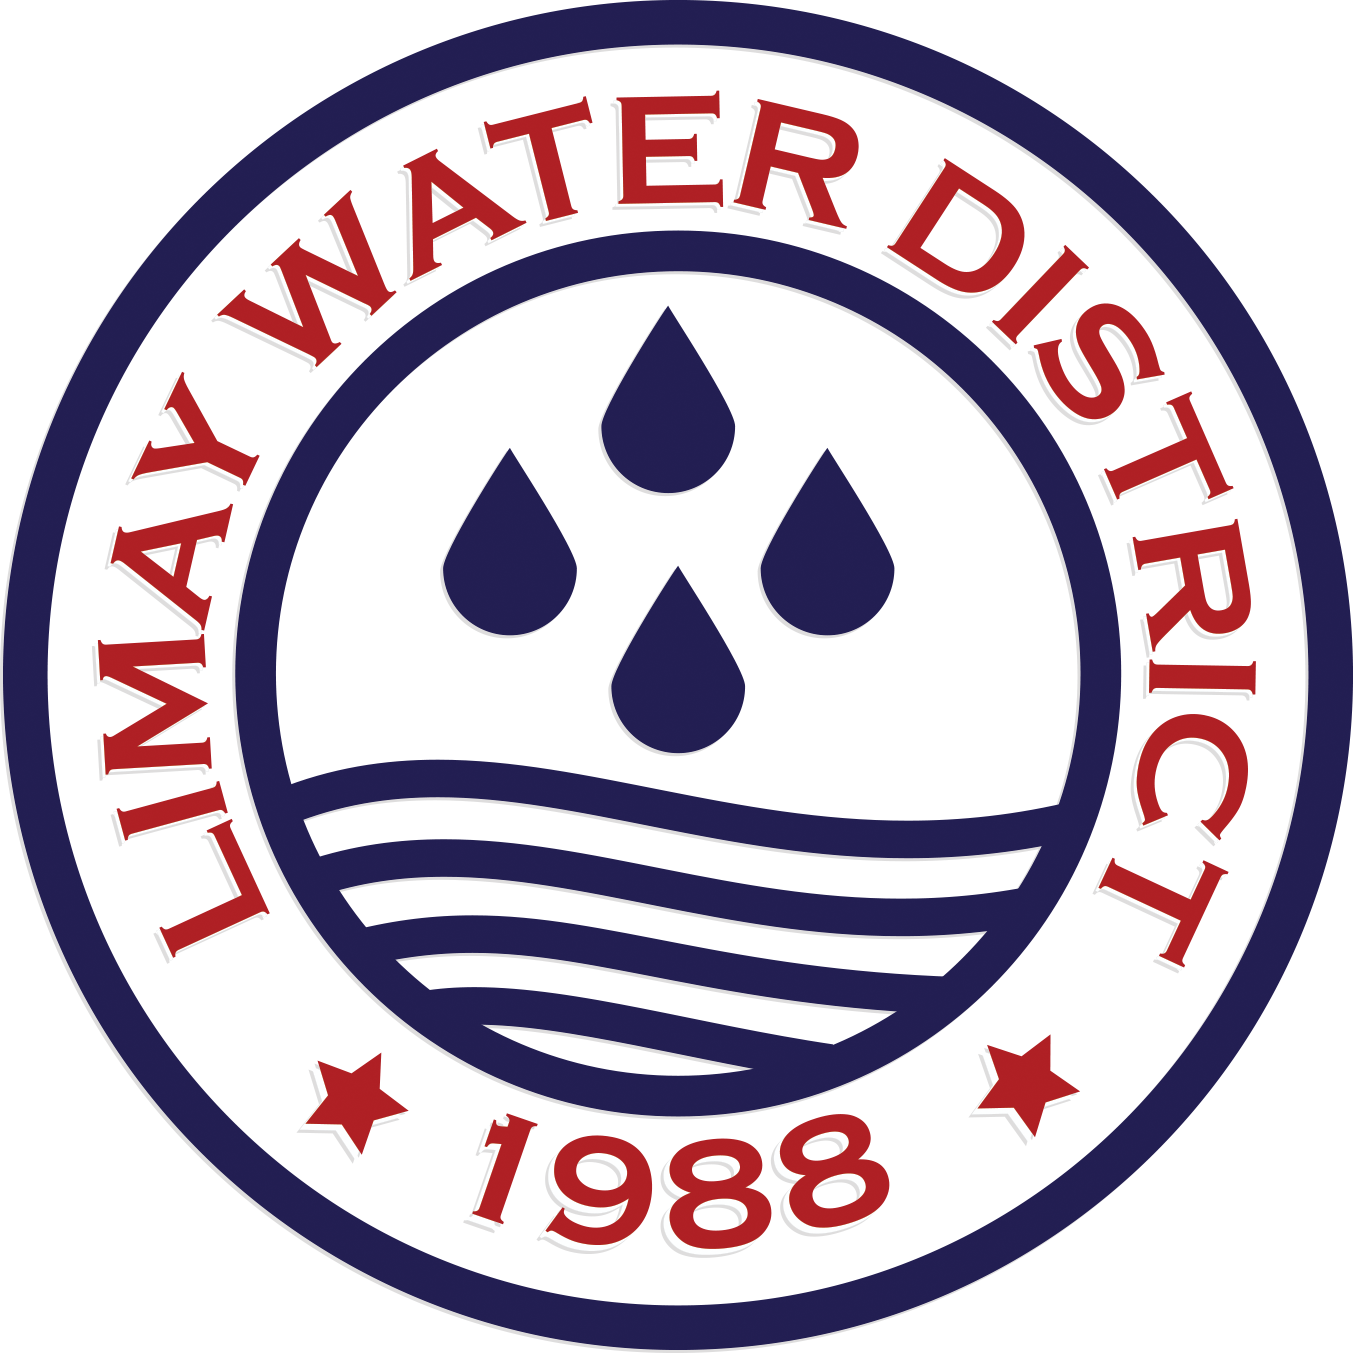 LIMAY WATER DISTRICT